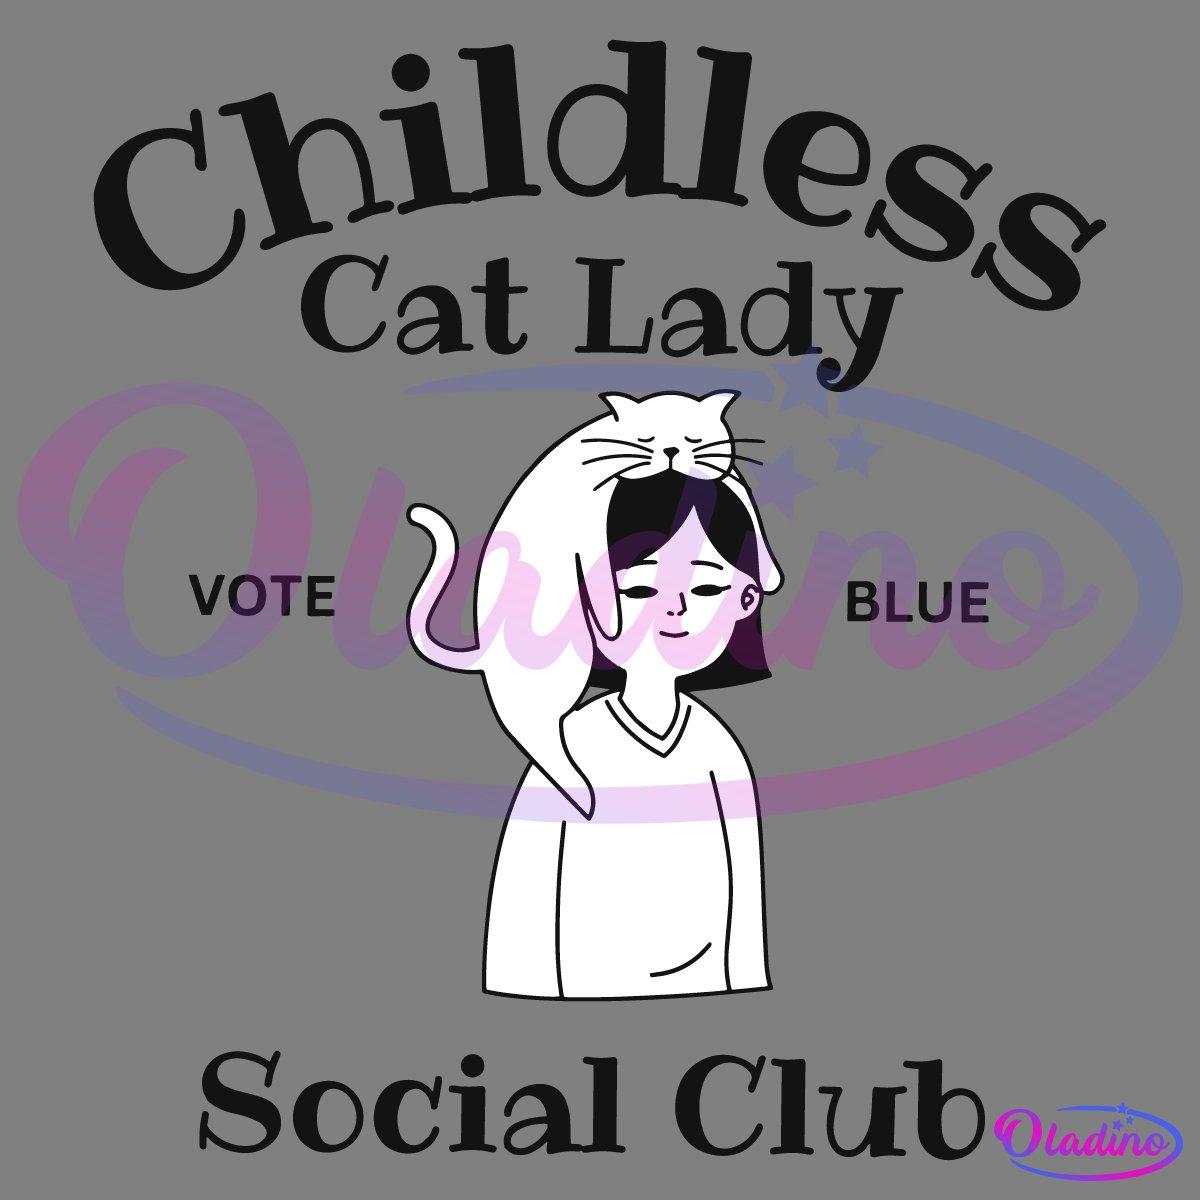 A black and white illustration shows a woman with a content cat draped over her head. Text above reads "Childless Cat Lady" and text below reads "Social Club." The words "VOTE BLUE" are situated on either side of the woman.